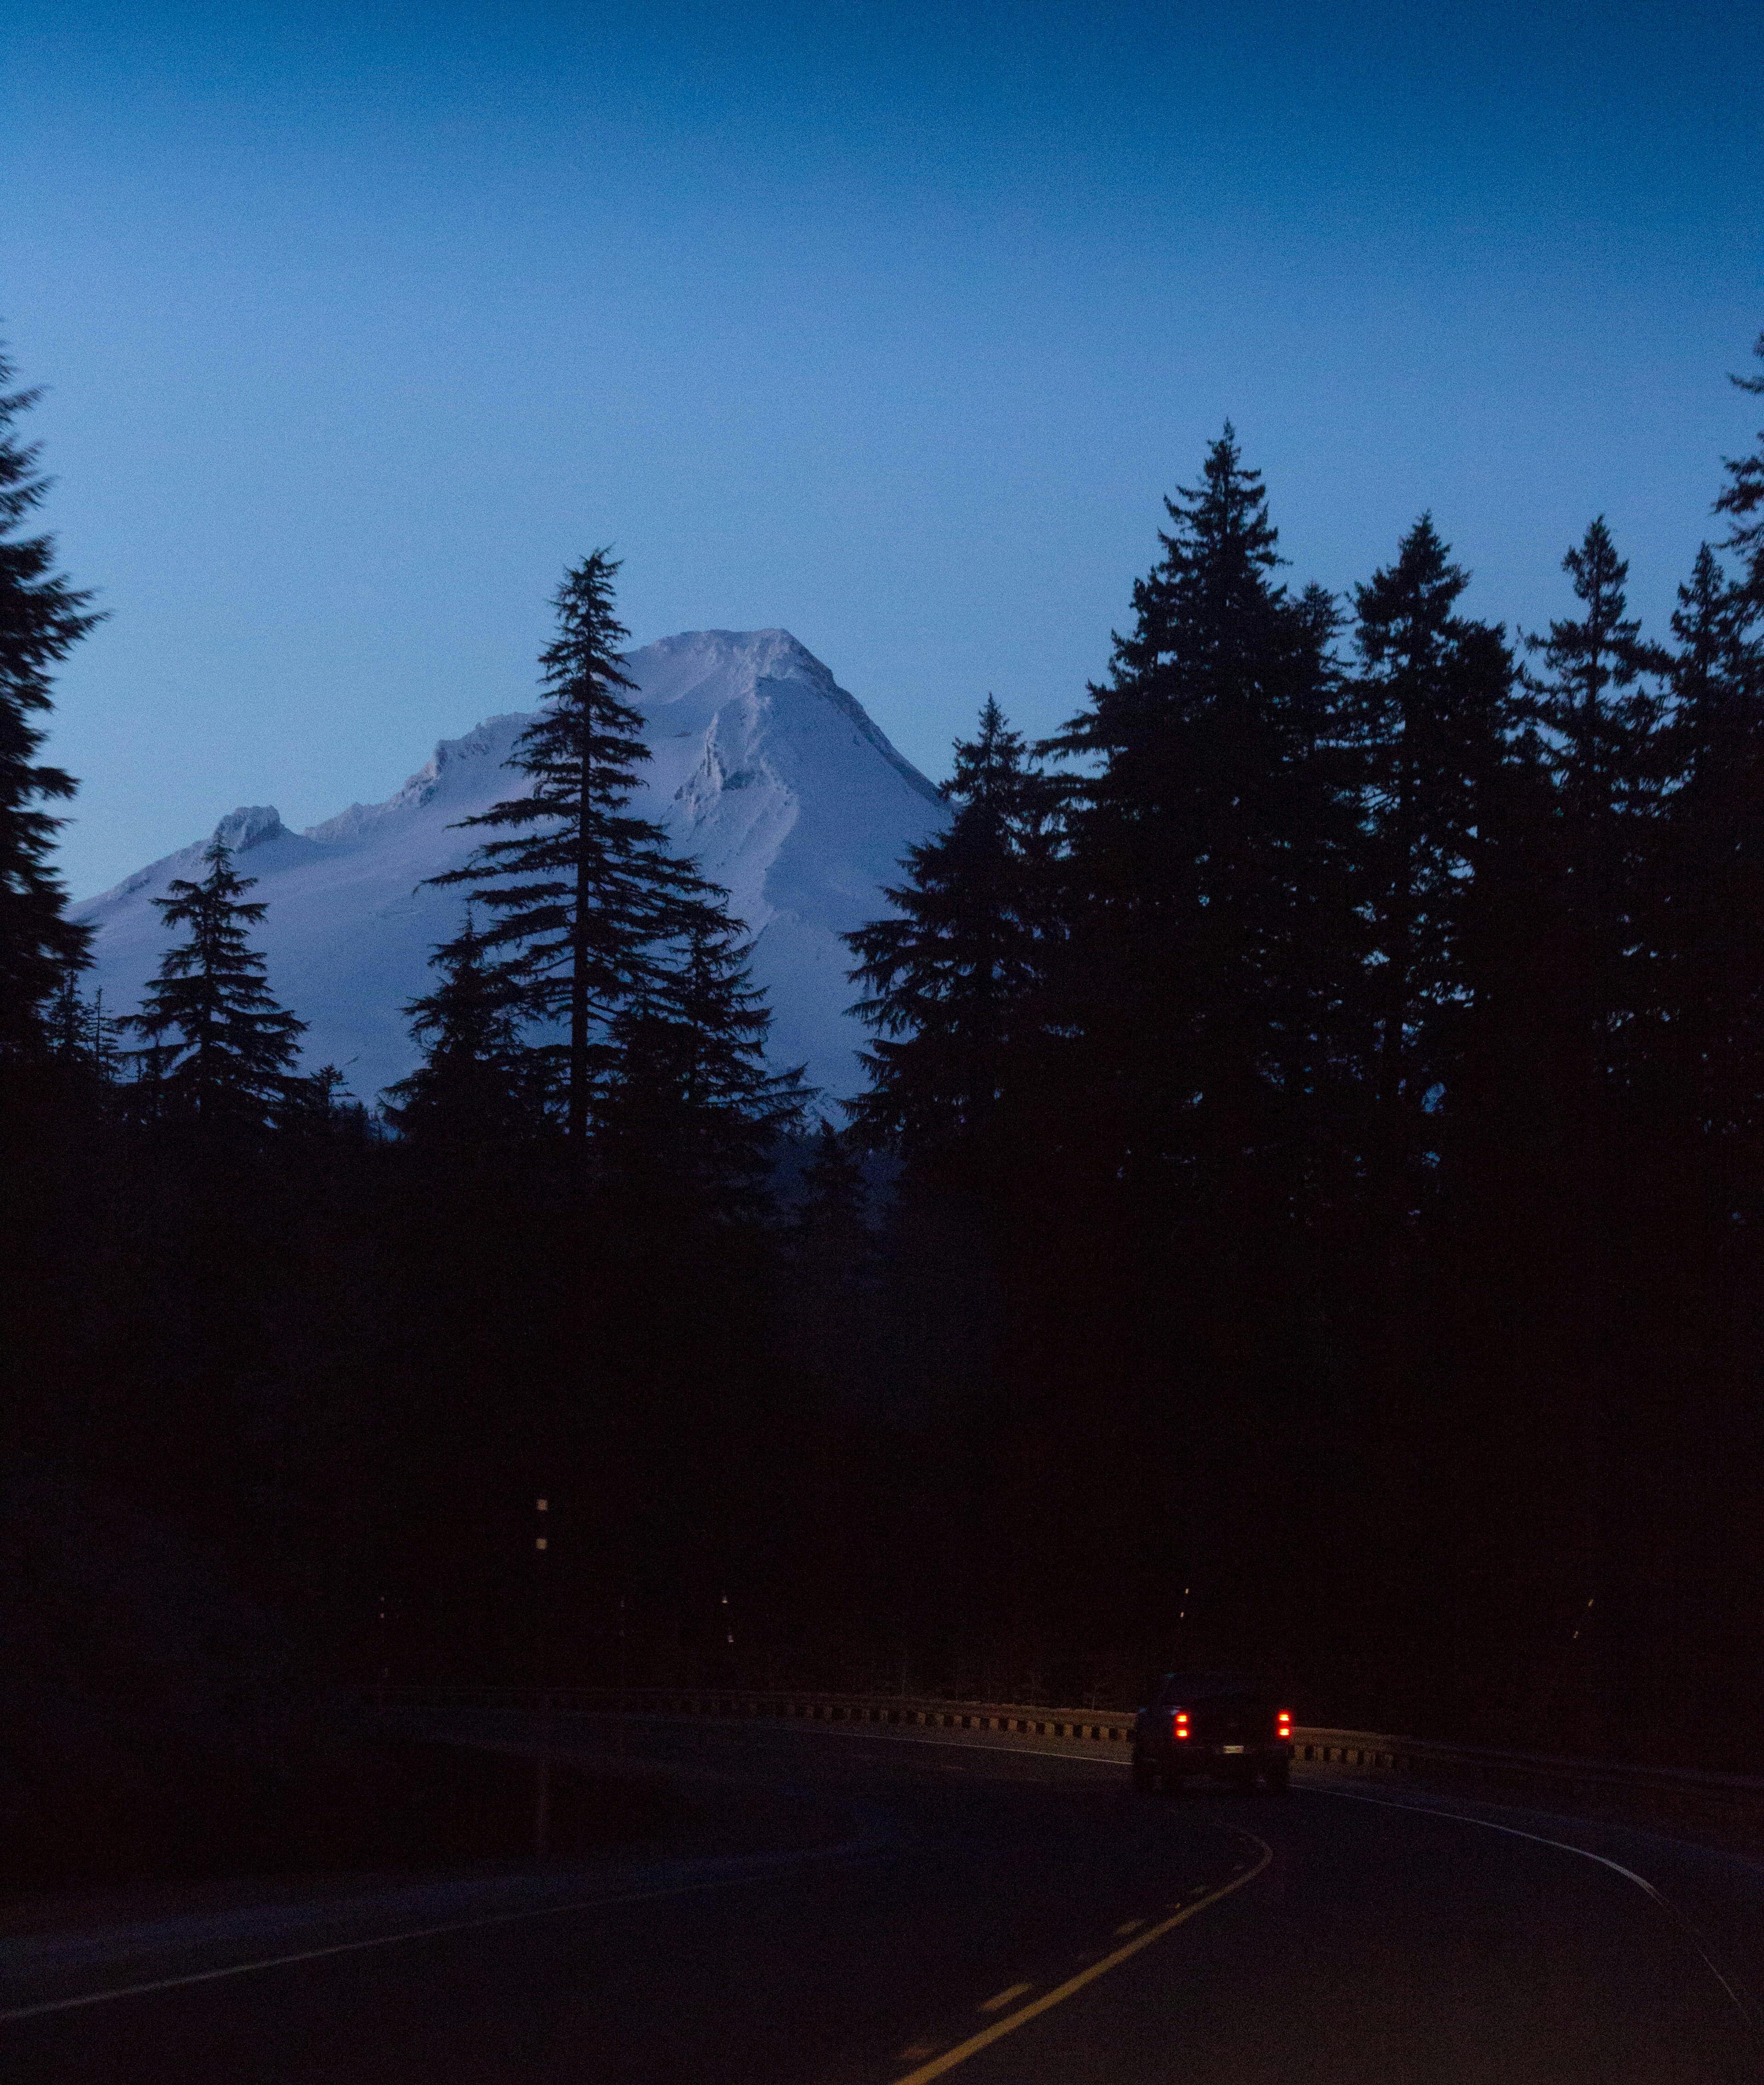 Driving down a highway with a view of Mt. Hood National Forest